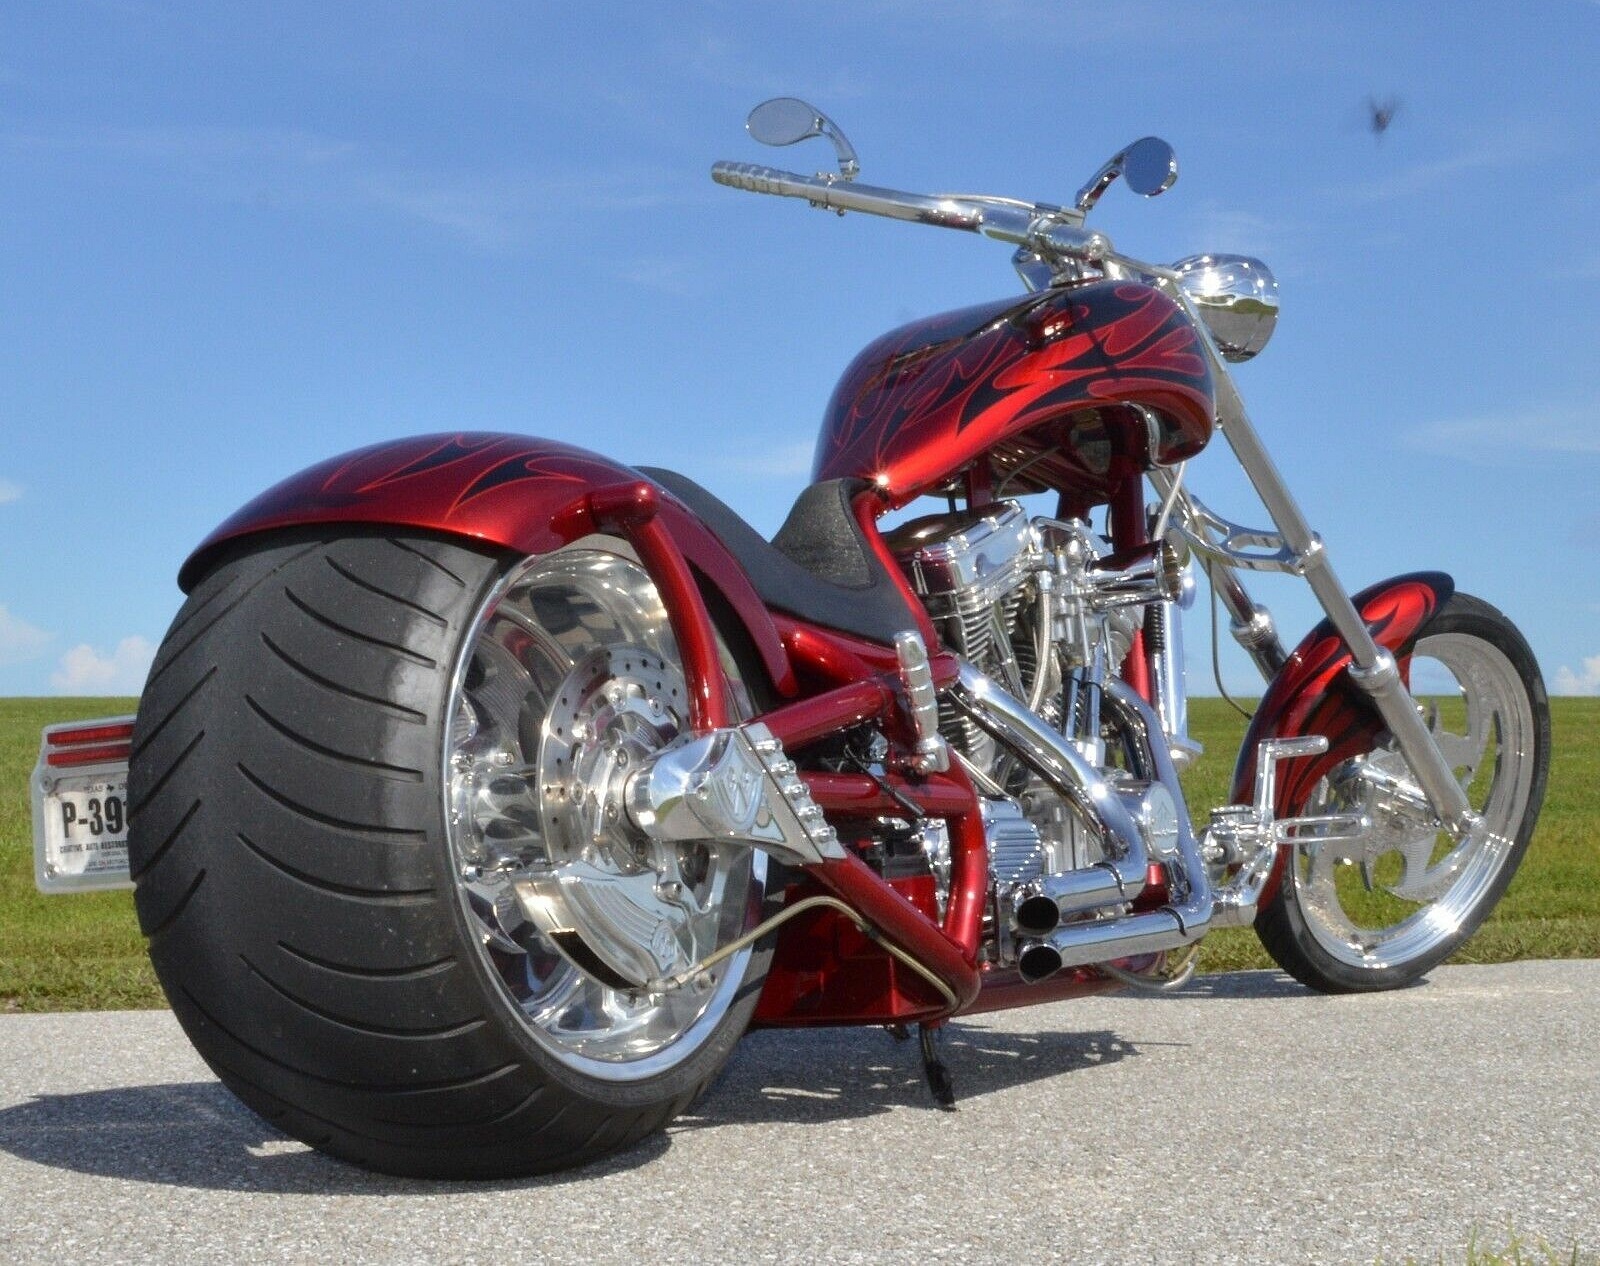 Bourget Python Chopper right rear tire low angle